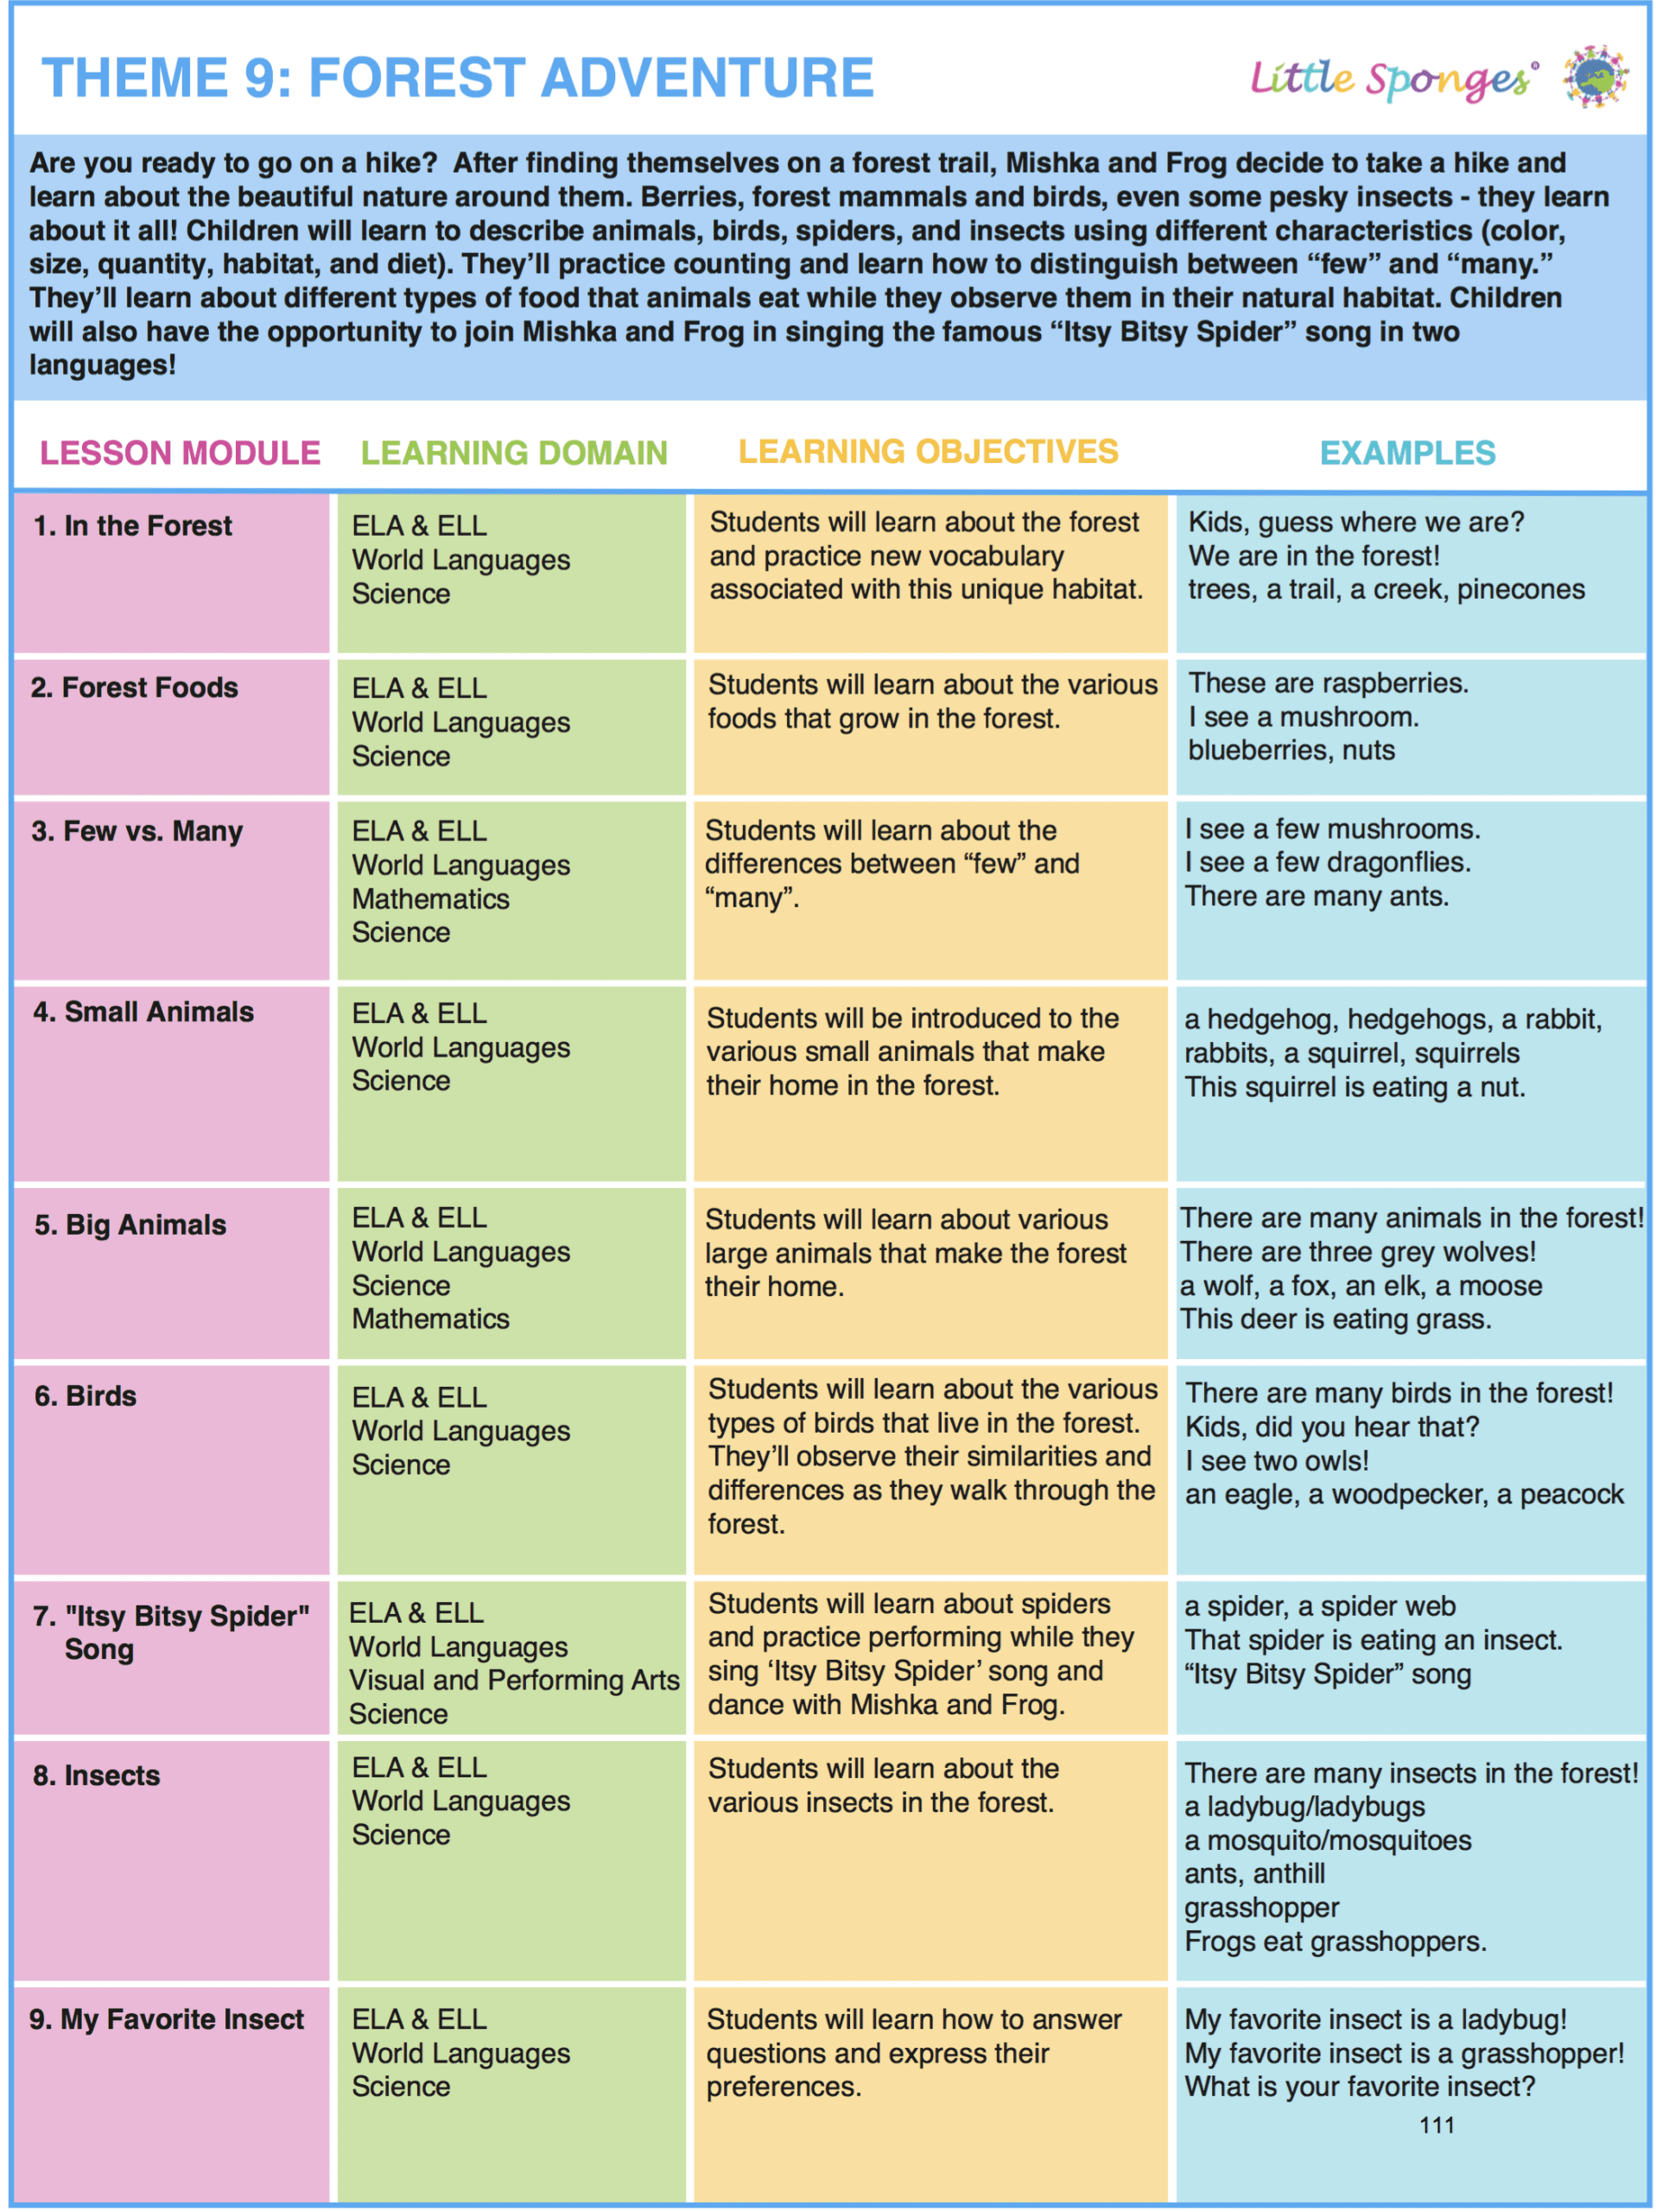 Color-coded lesson plan for a unit on forest life, with learning objectives, activities, and outcomes